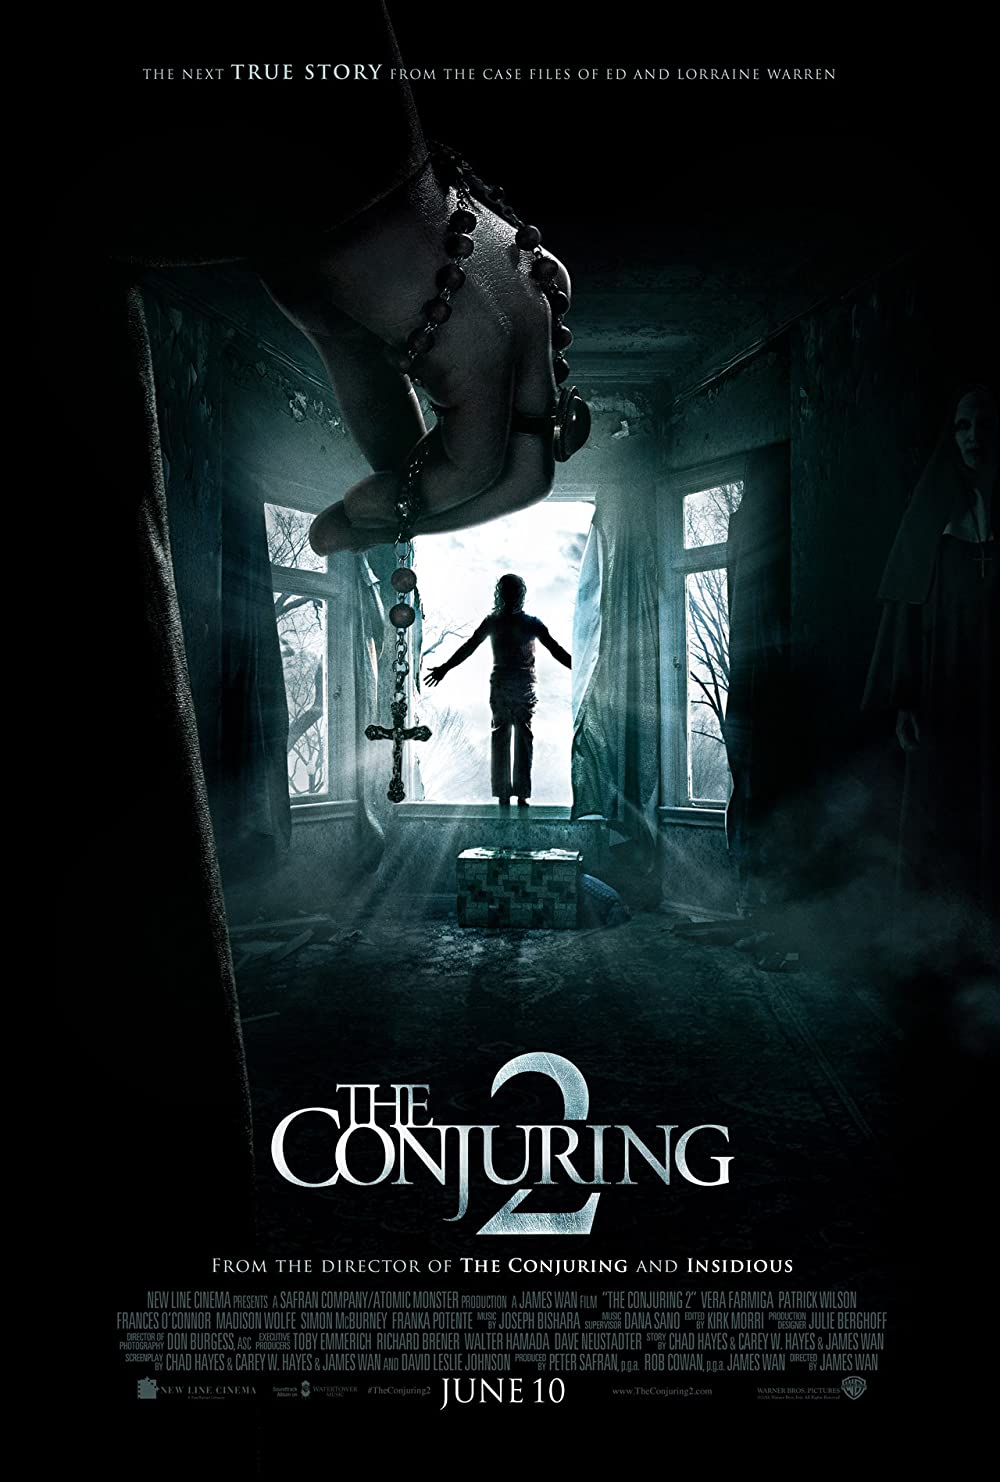 The Conjuring 2 (2016) Best Exorcism Movies You Can't Miss